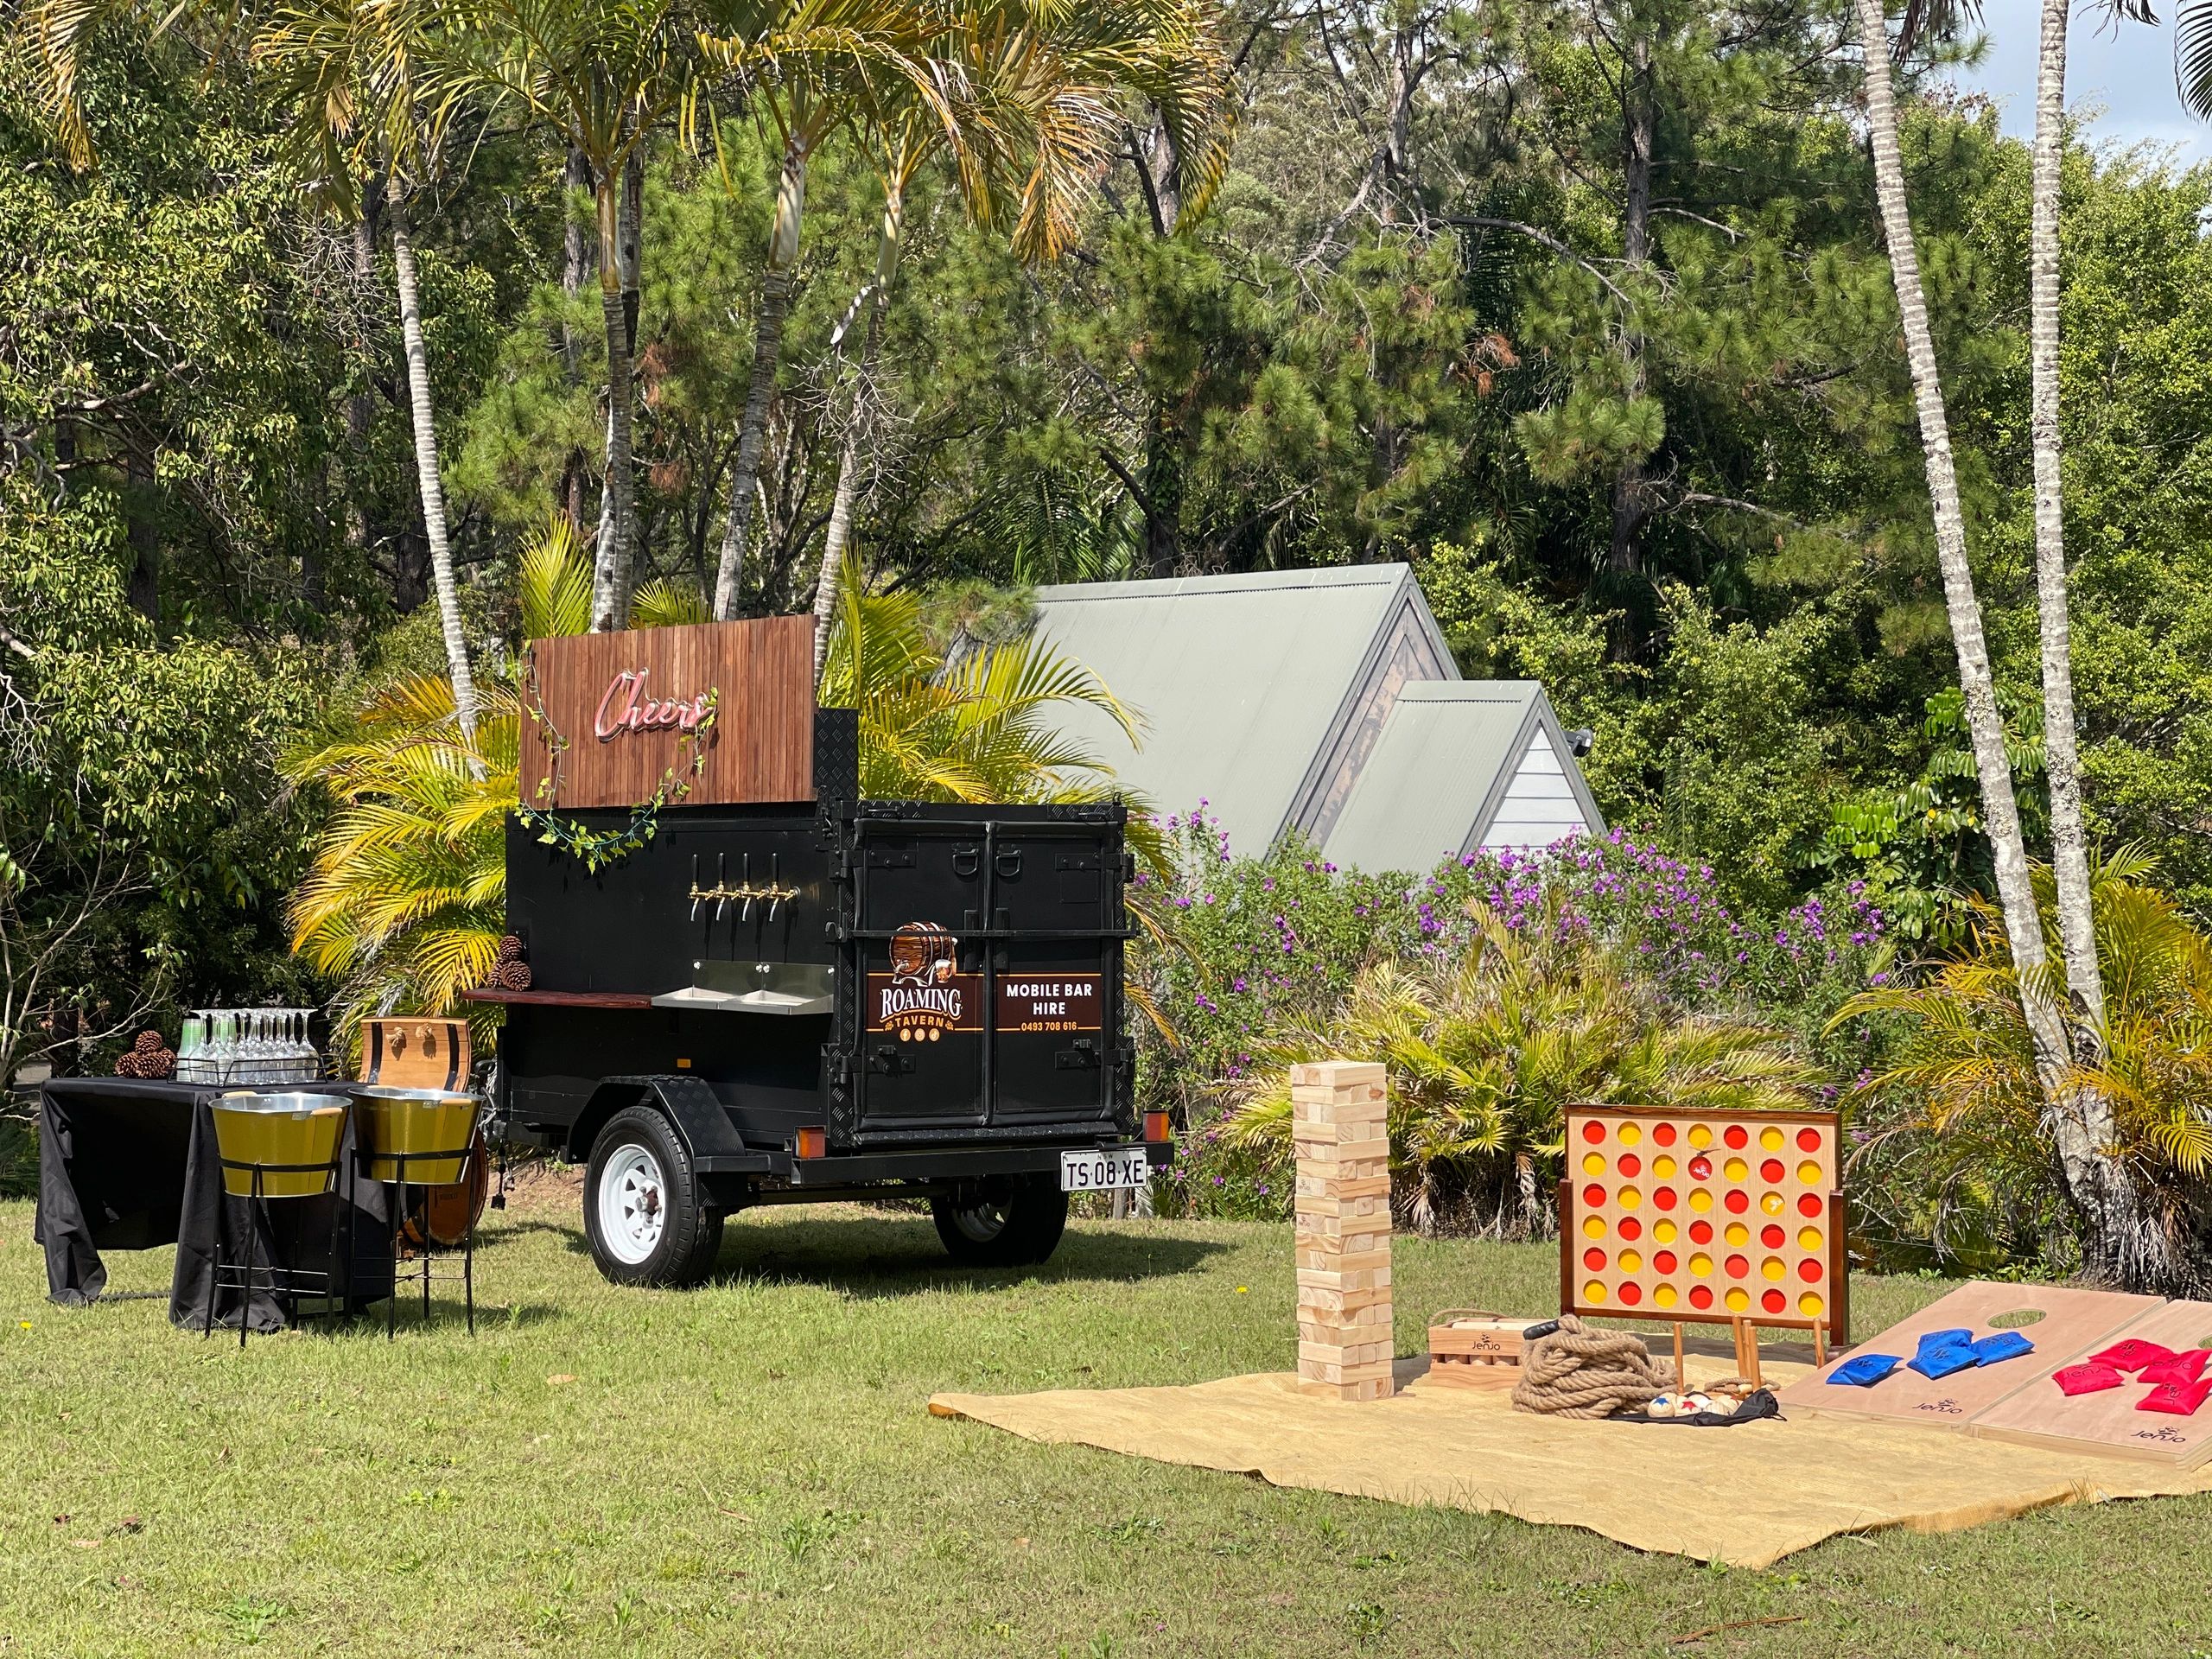 Mobile bar with: wine buckets, cooler, and yard games in an outdoor setting for outdoor events. 